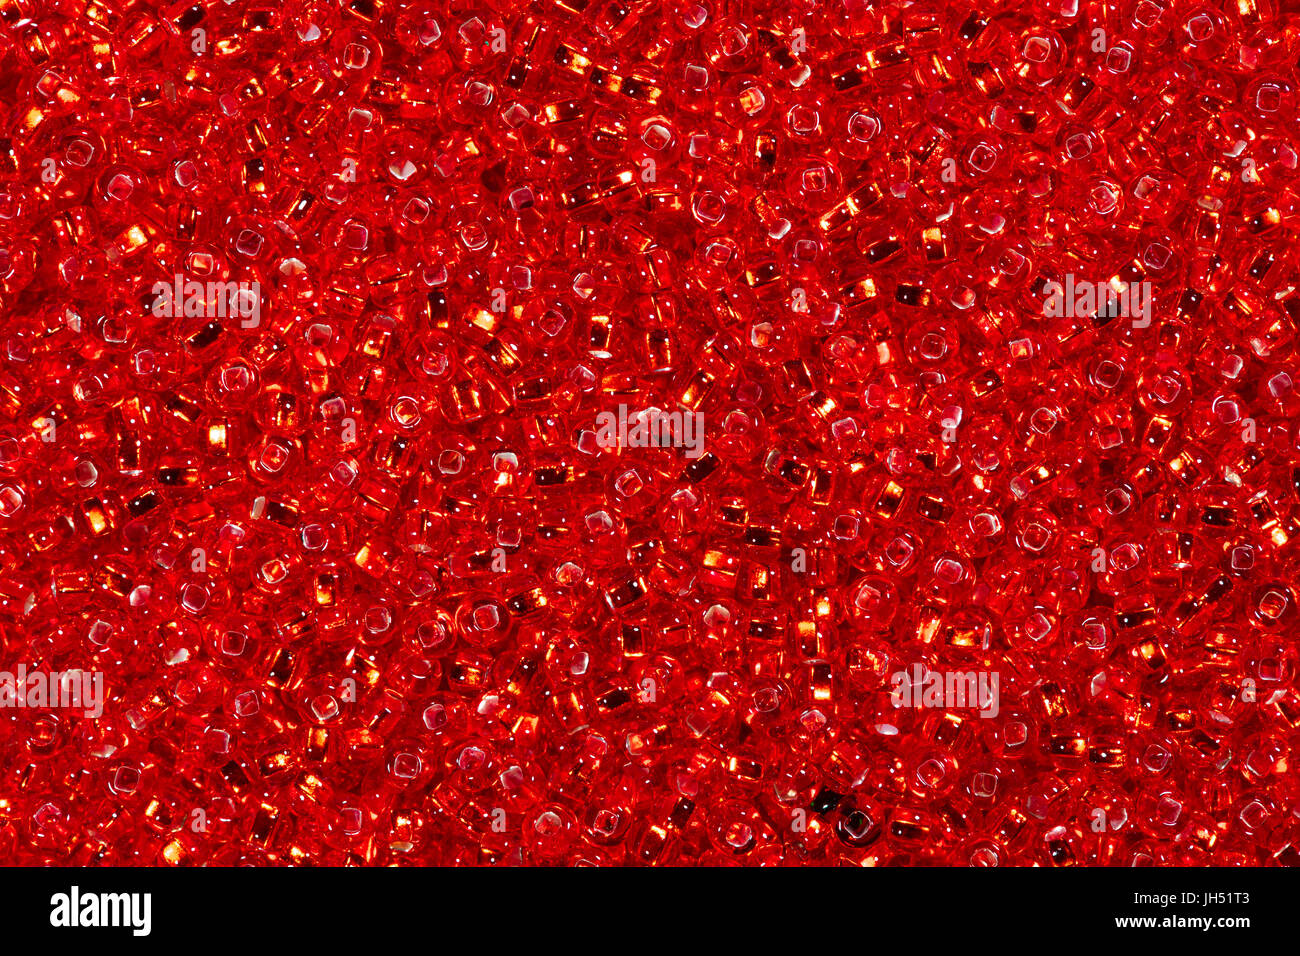 Background of bright red seed beads.  Stock Photo